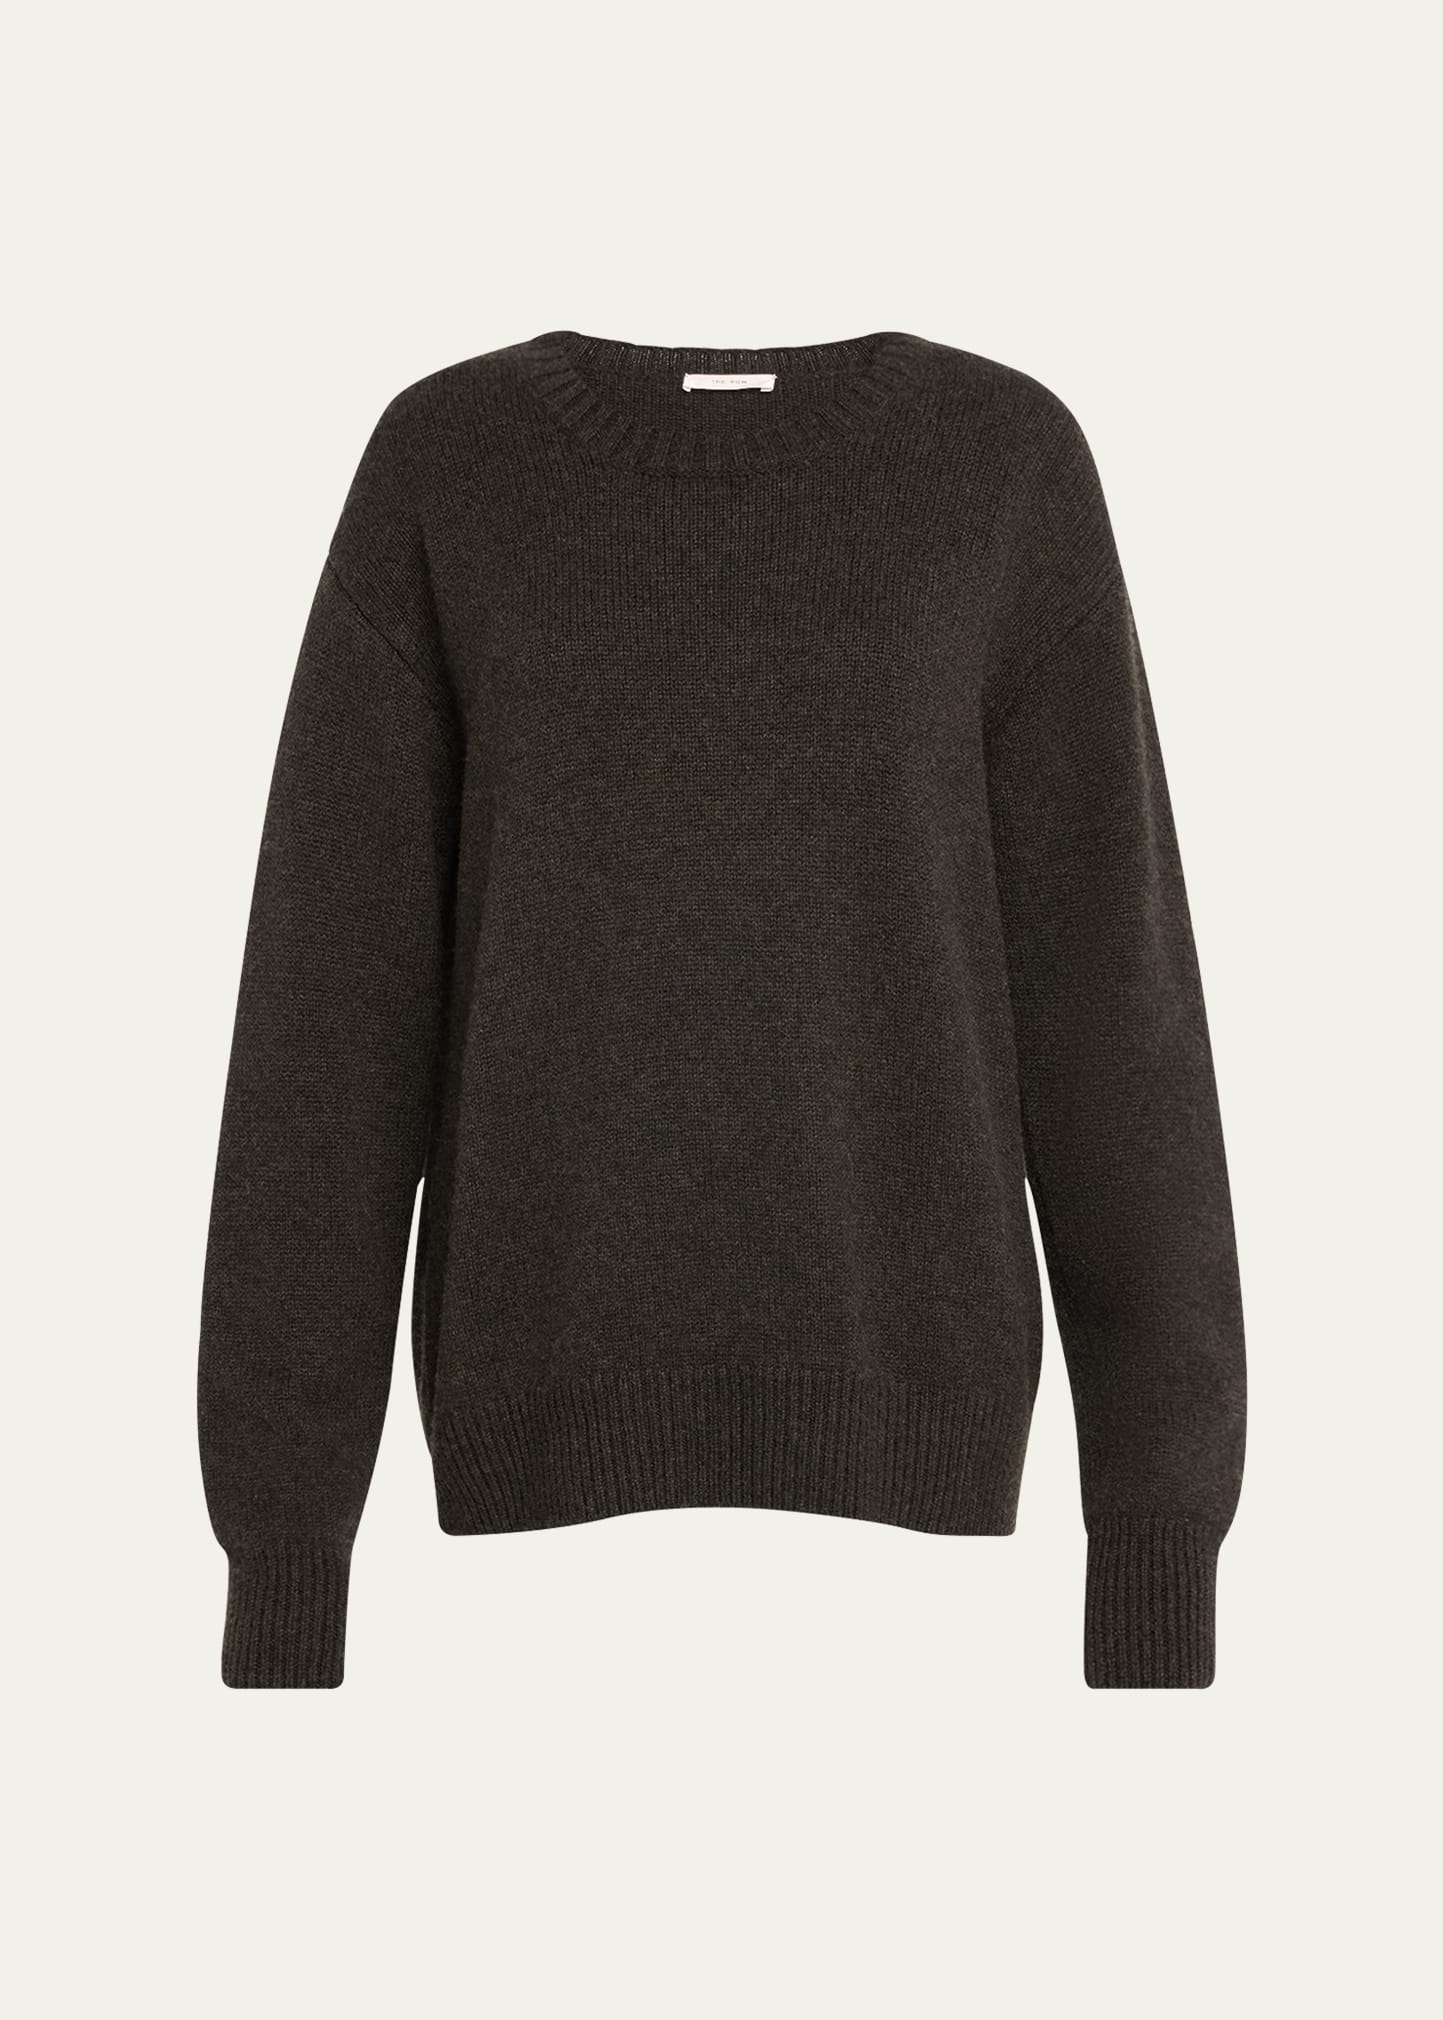 Shop The Row Fiji Cashmere Knit Sweater In Enzyme Black Mela